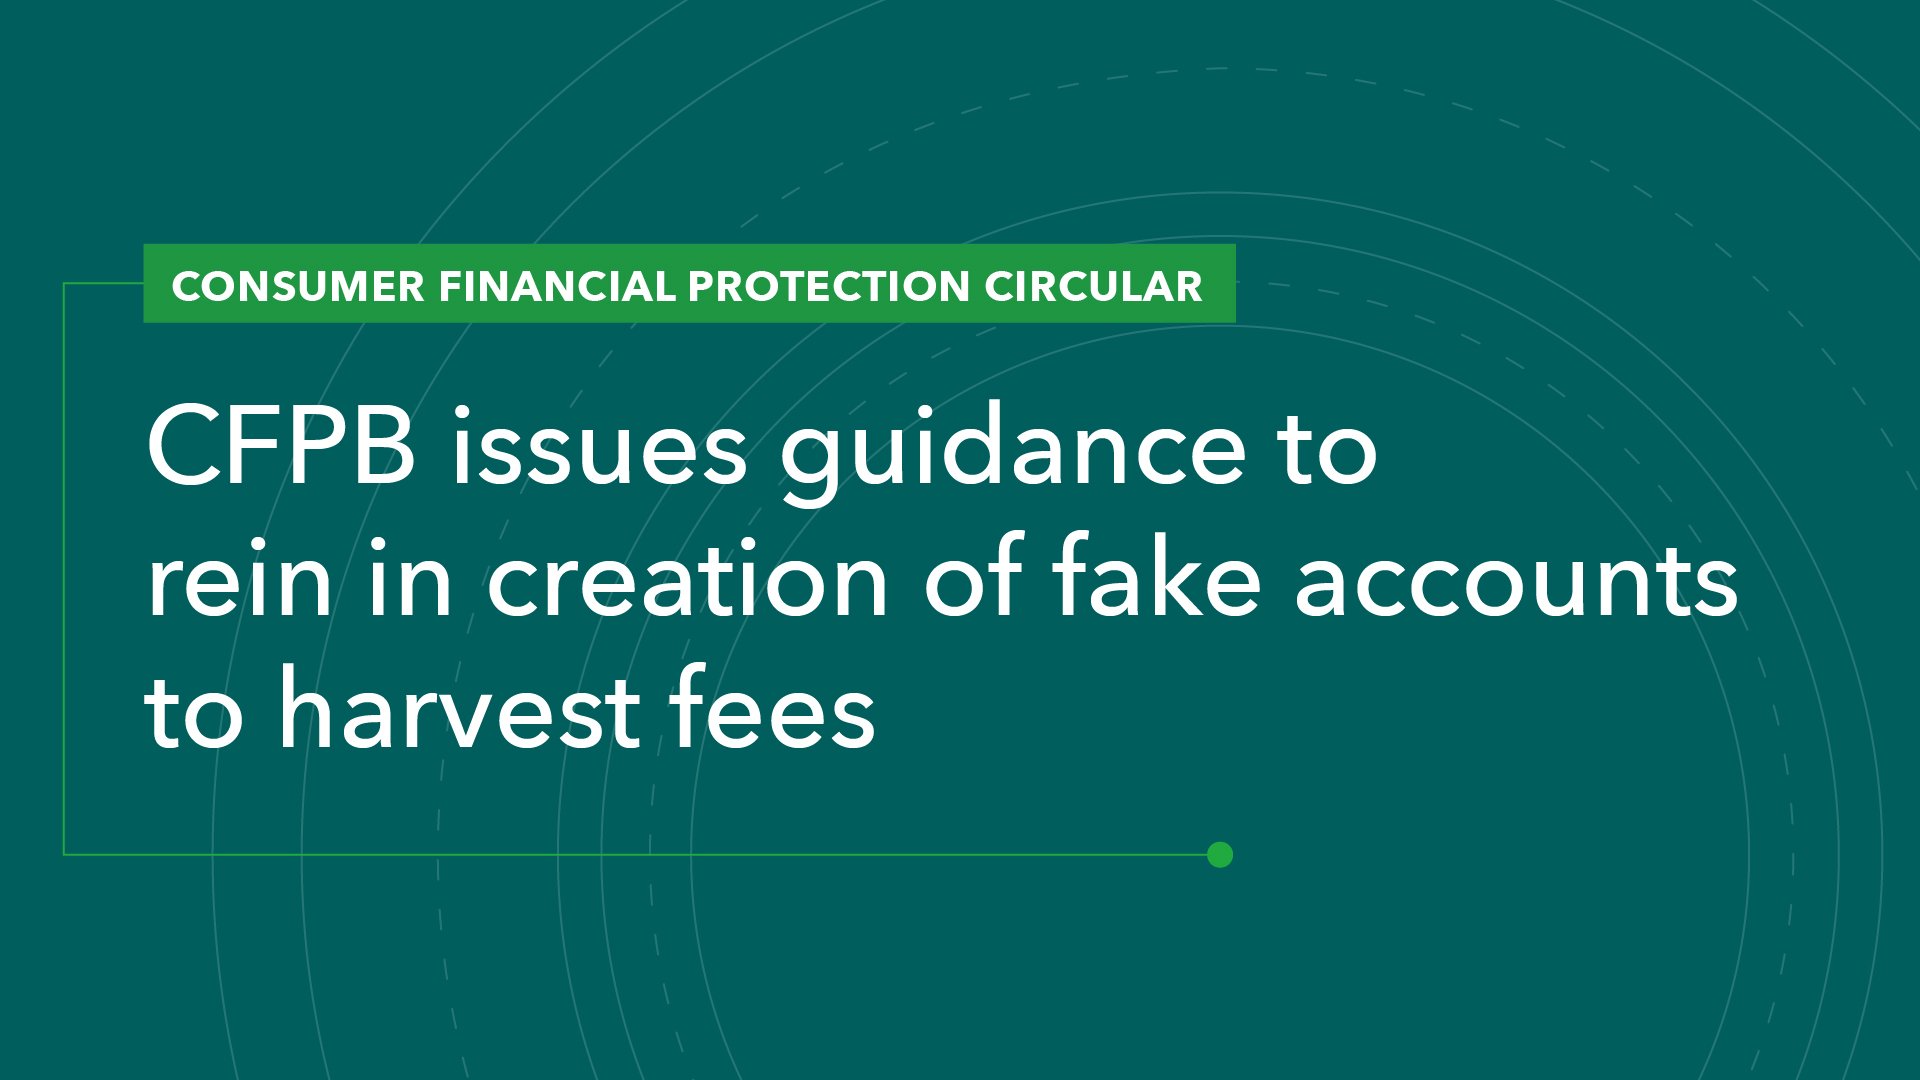 CFPB Issues Guidance to Rein in Creation of Fake Accounts to Harvest Fees